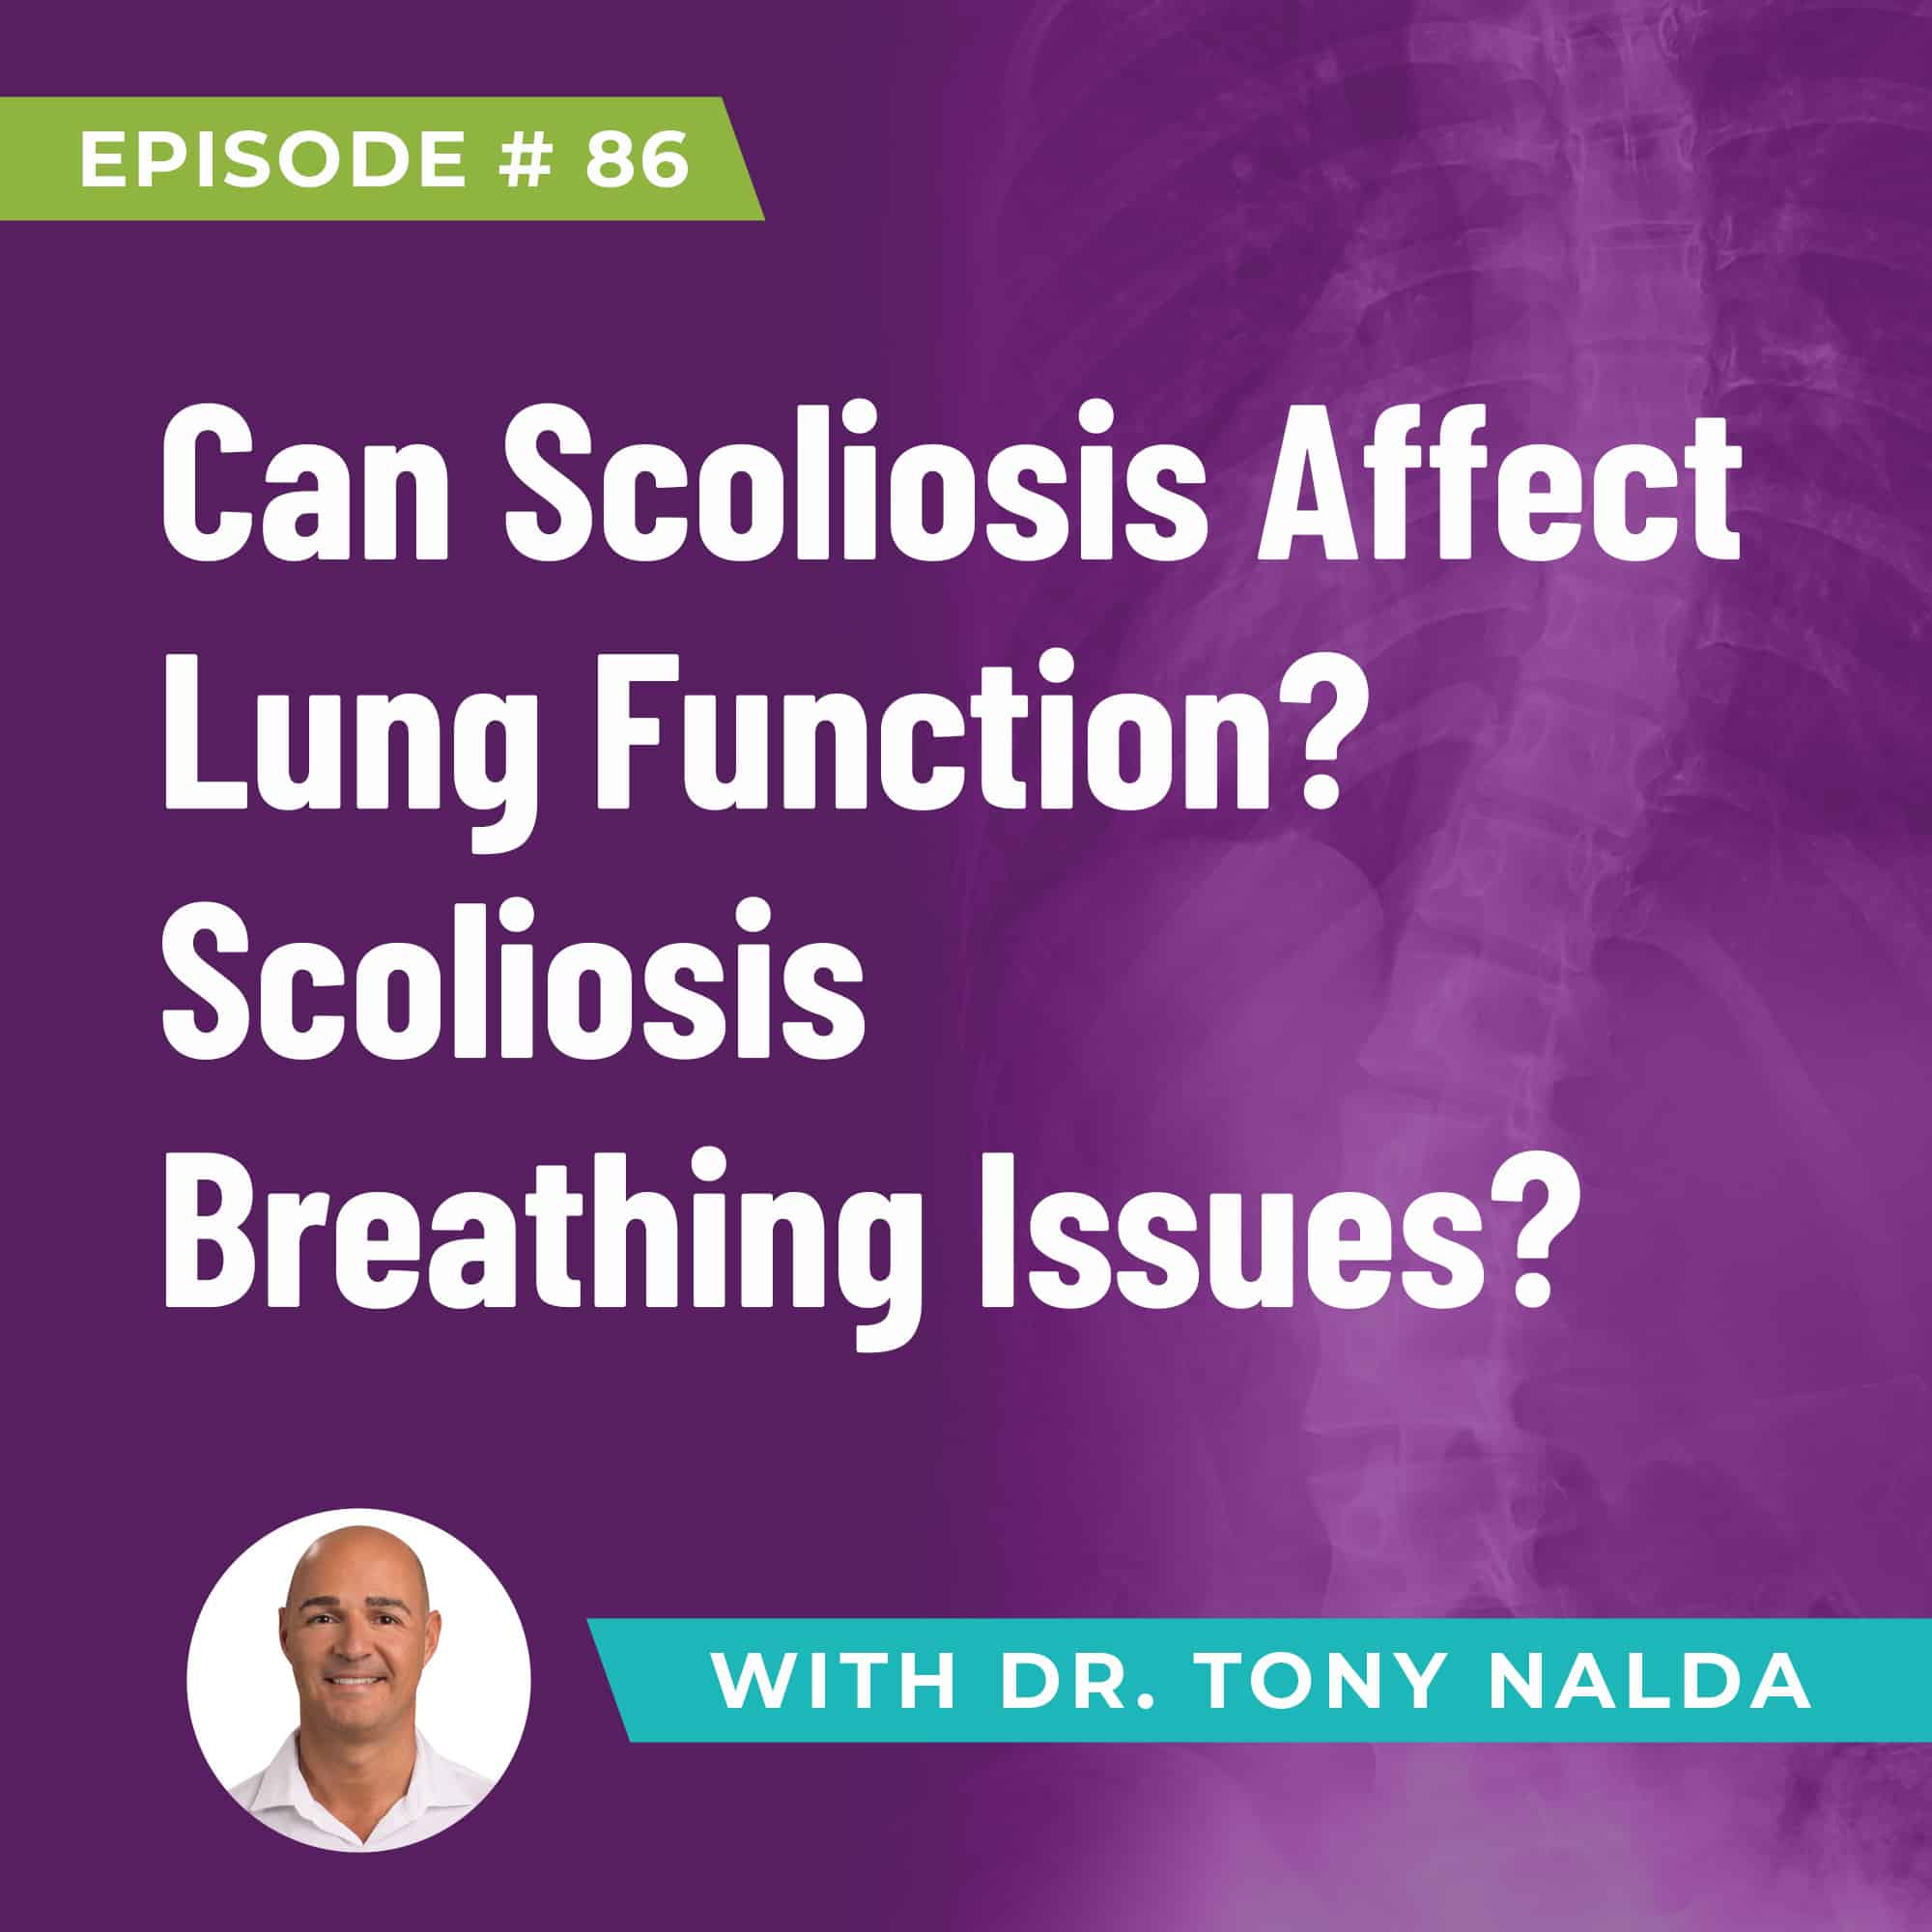 Can Scoliosis Affect Lung Function? Scoliosis Breathing Issues?